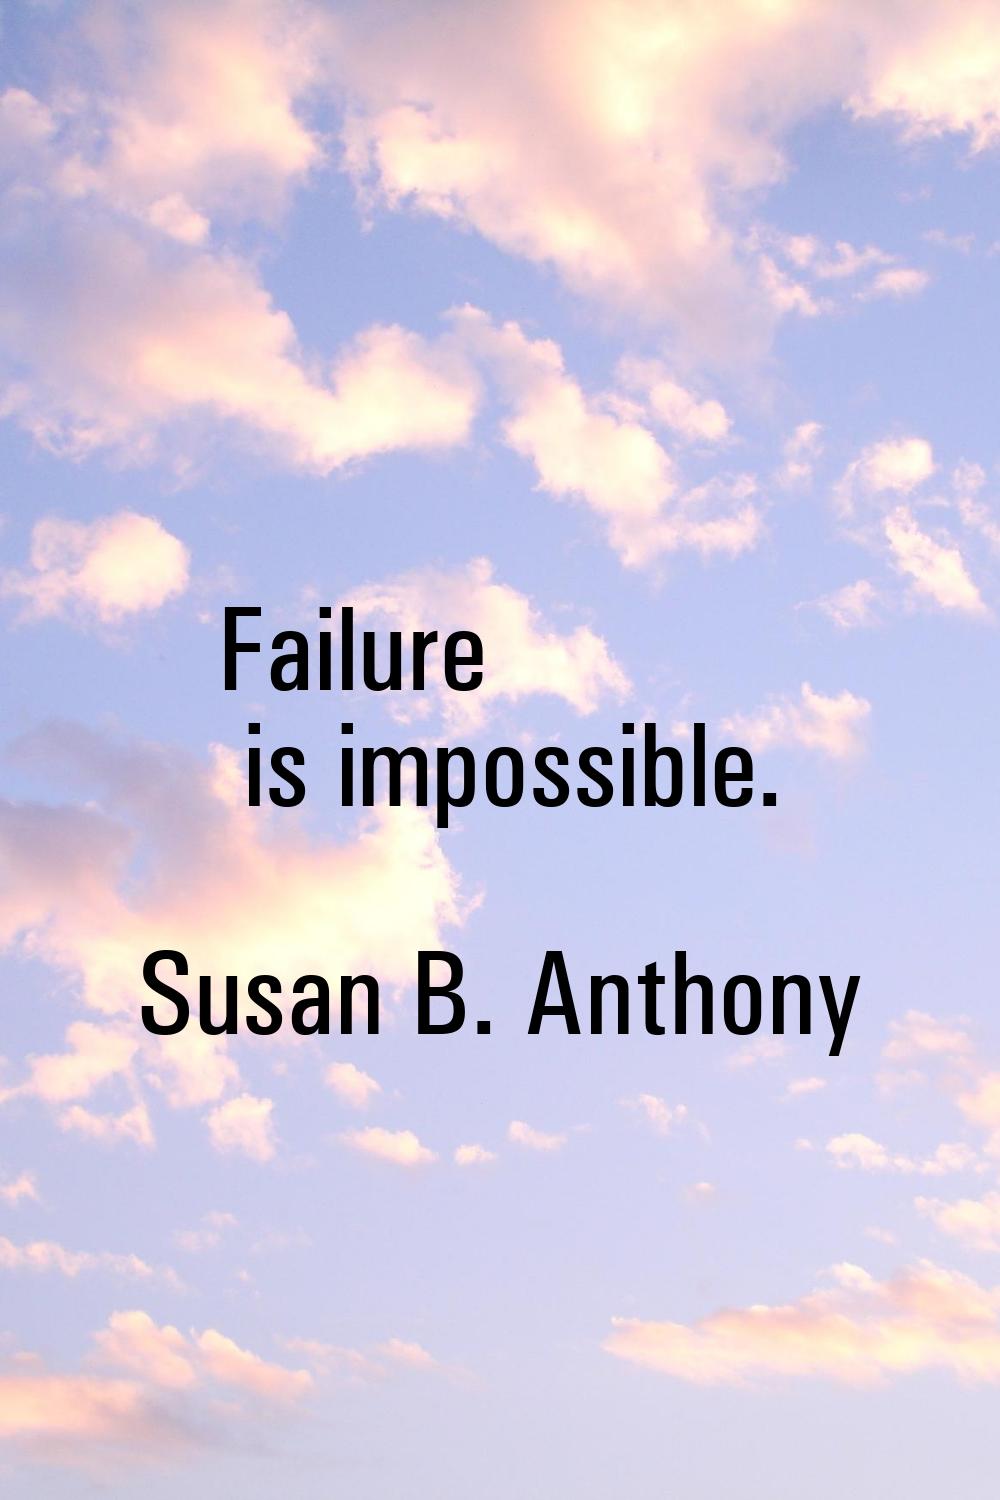 Failure is impossible.